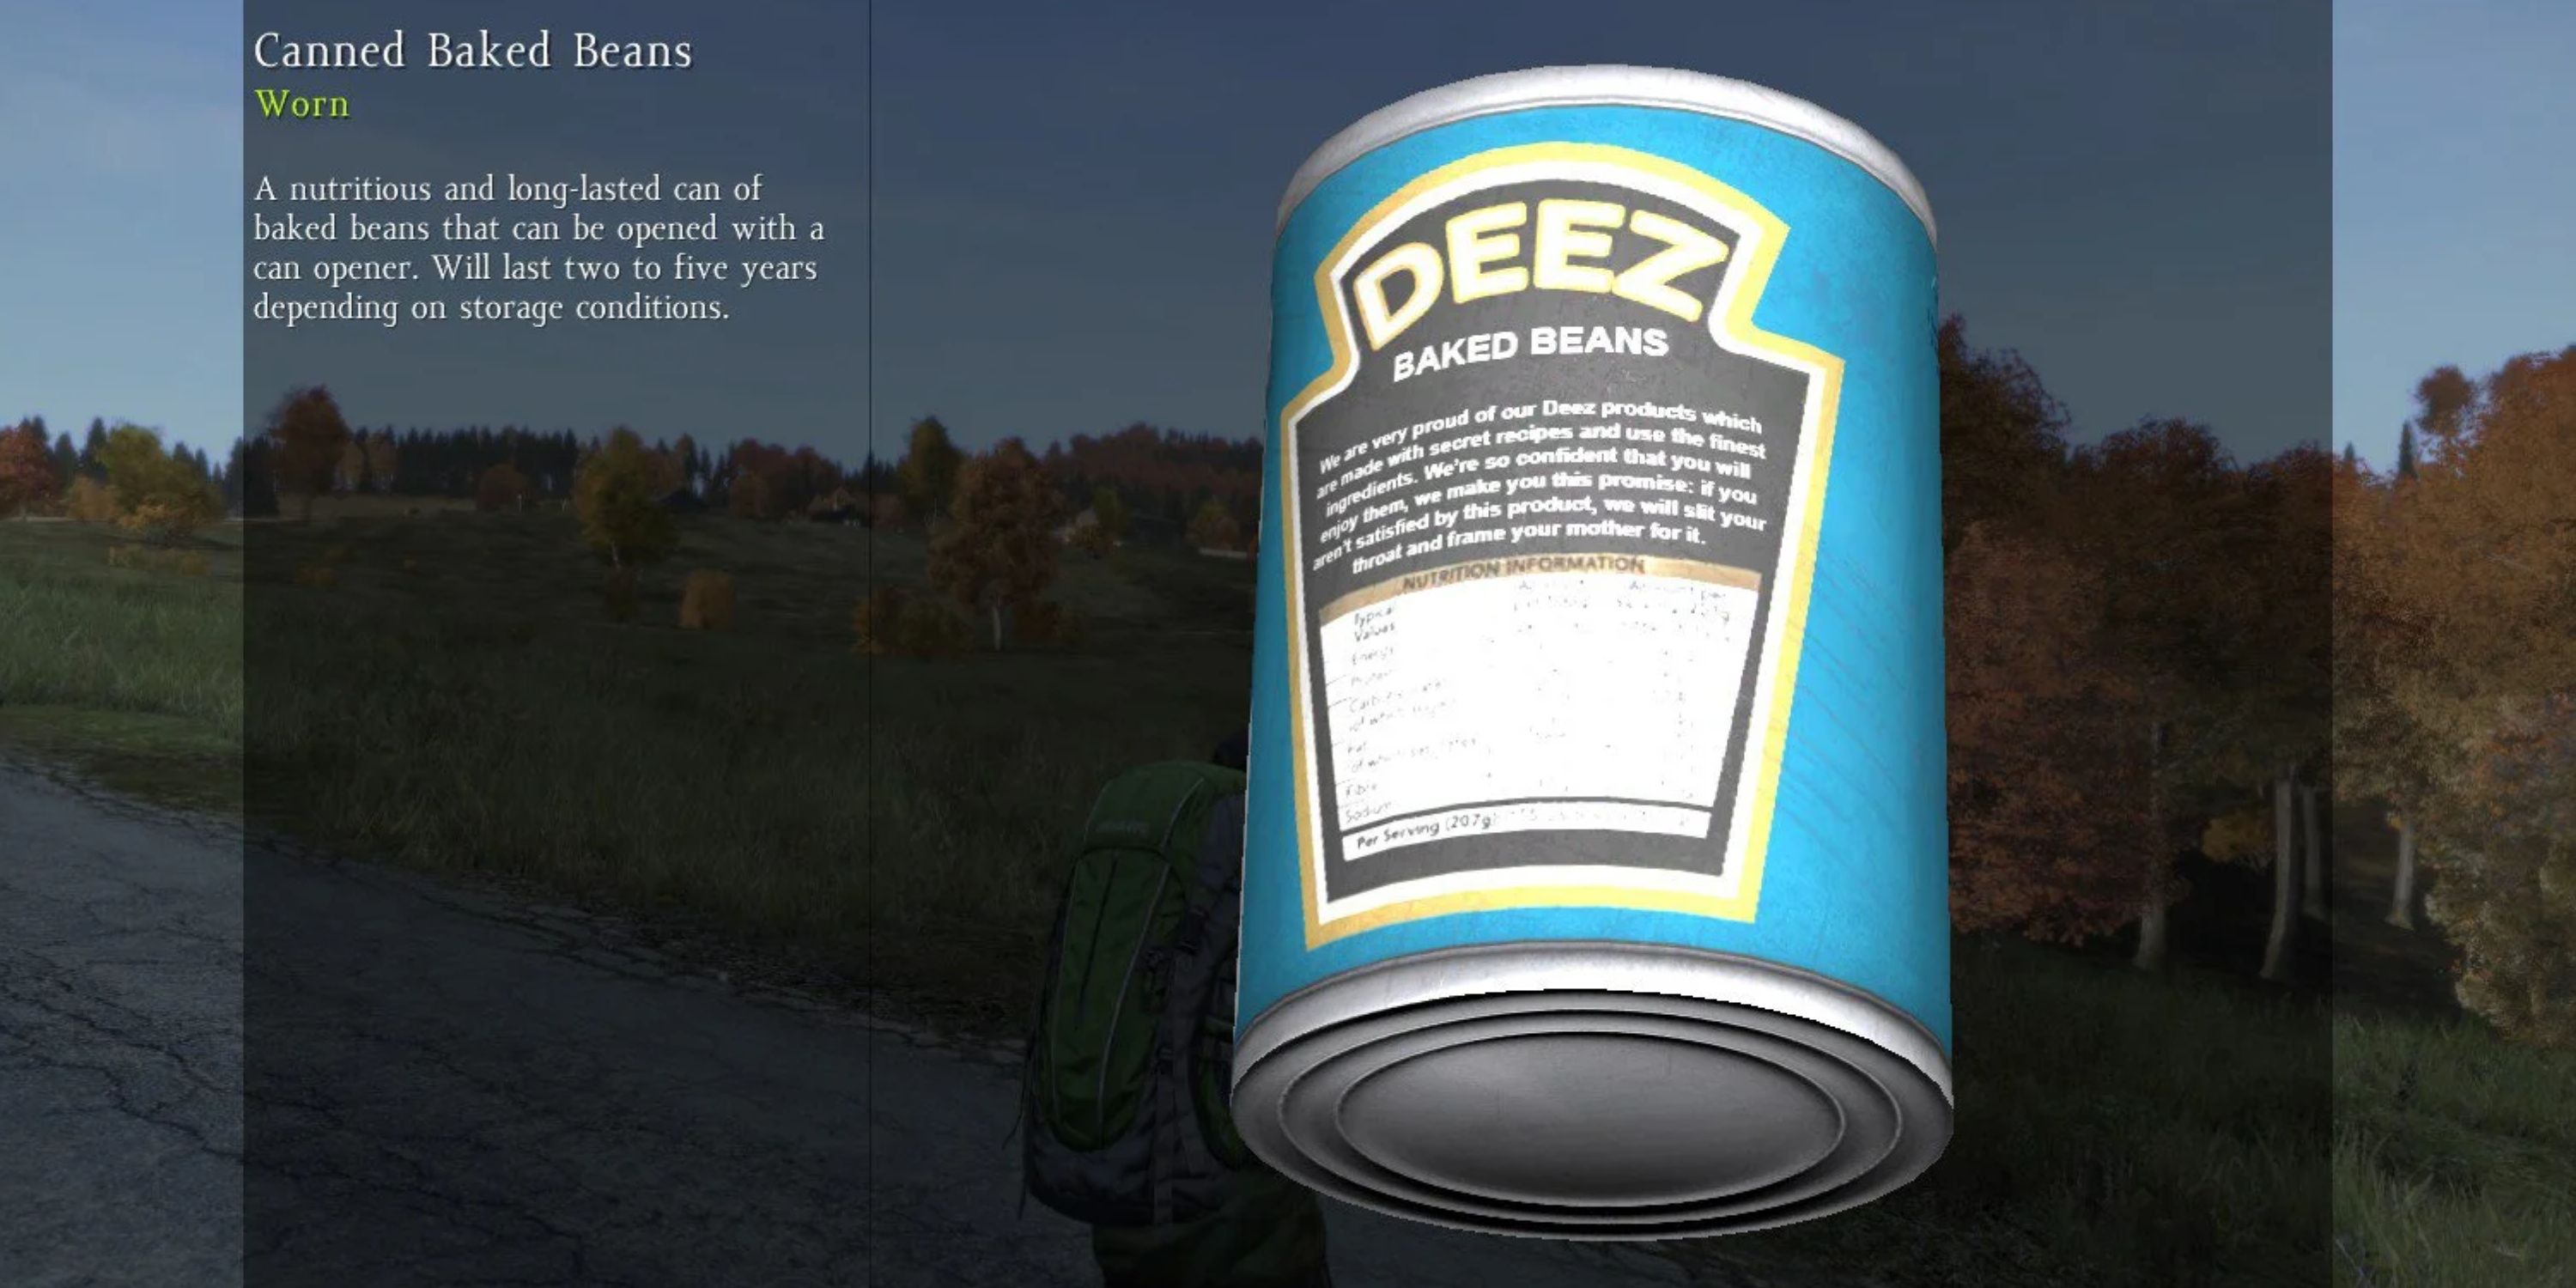 "Deez" baked beans, another canned food in dayz